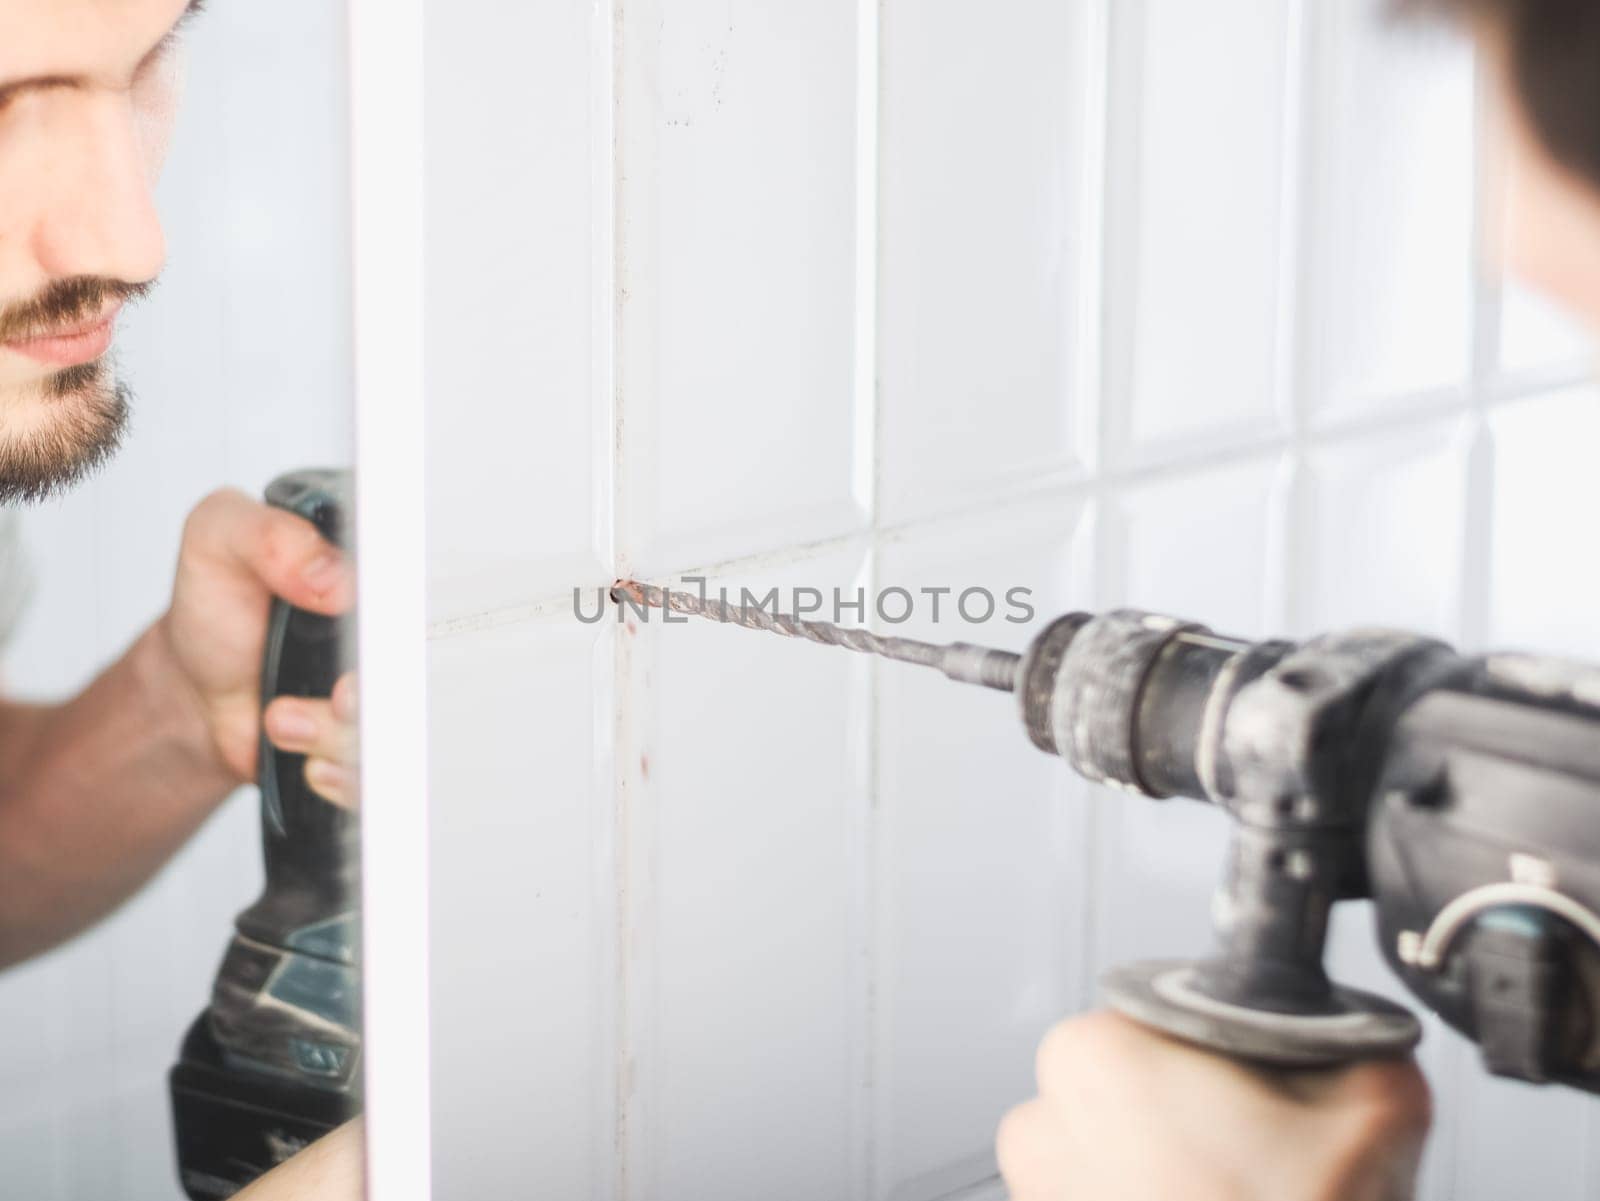 One young Caucasian man drills a hole between the seams of a tiled wall using a drill in the bathroom, reflected in the mirror of a wall cabinet, close-up view from below.